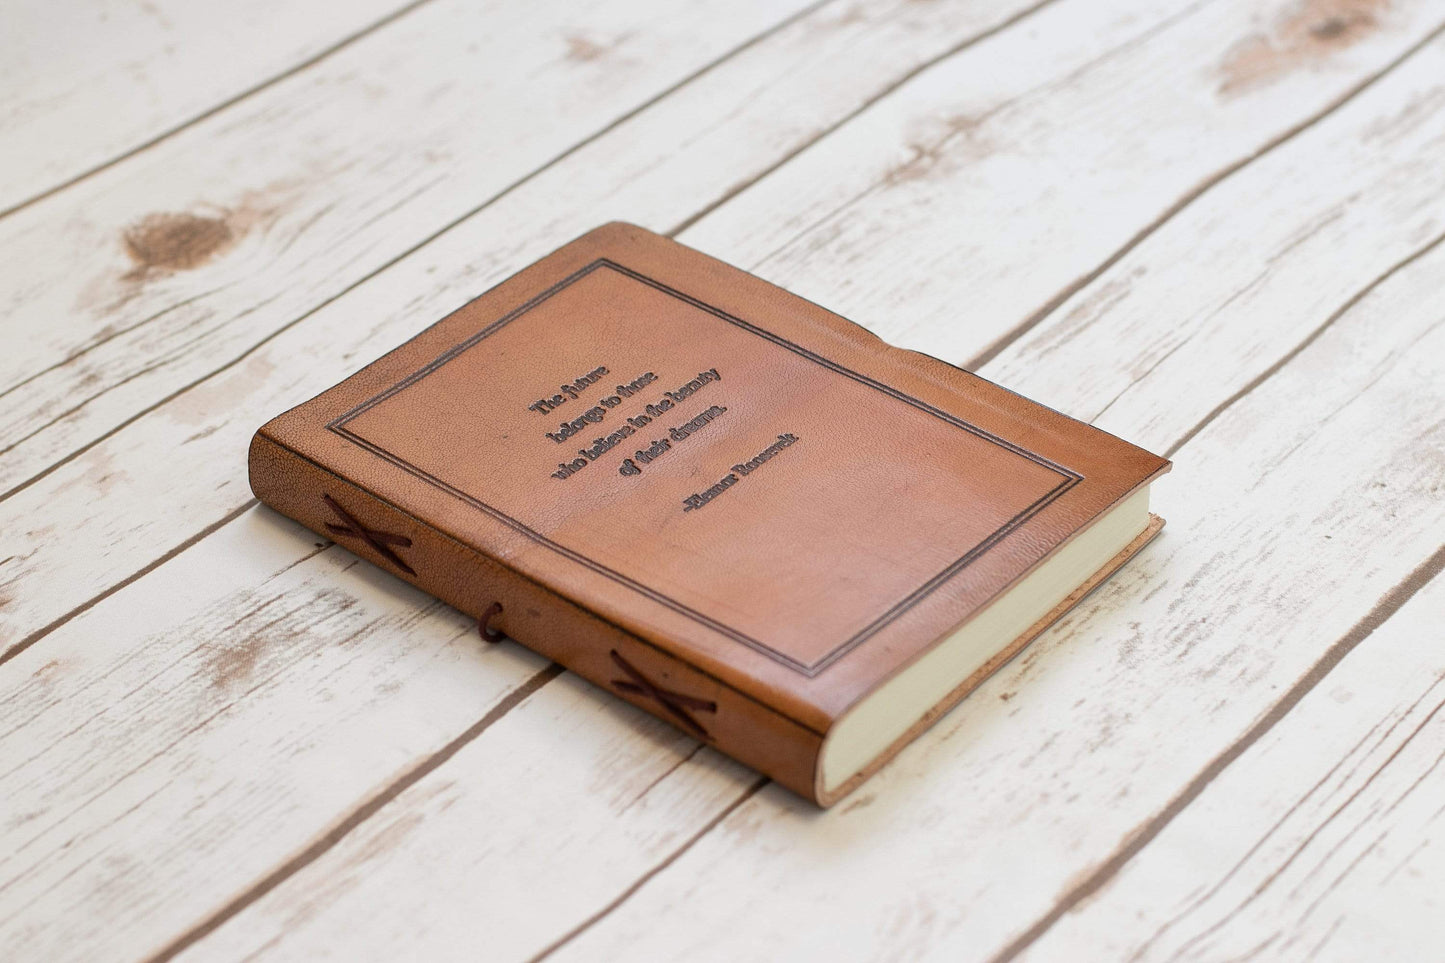 The Future Belongs Eleanor Roosevelt Quote Leather Journal - 8x6 Size by Soothi